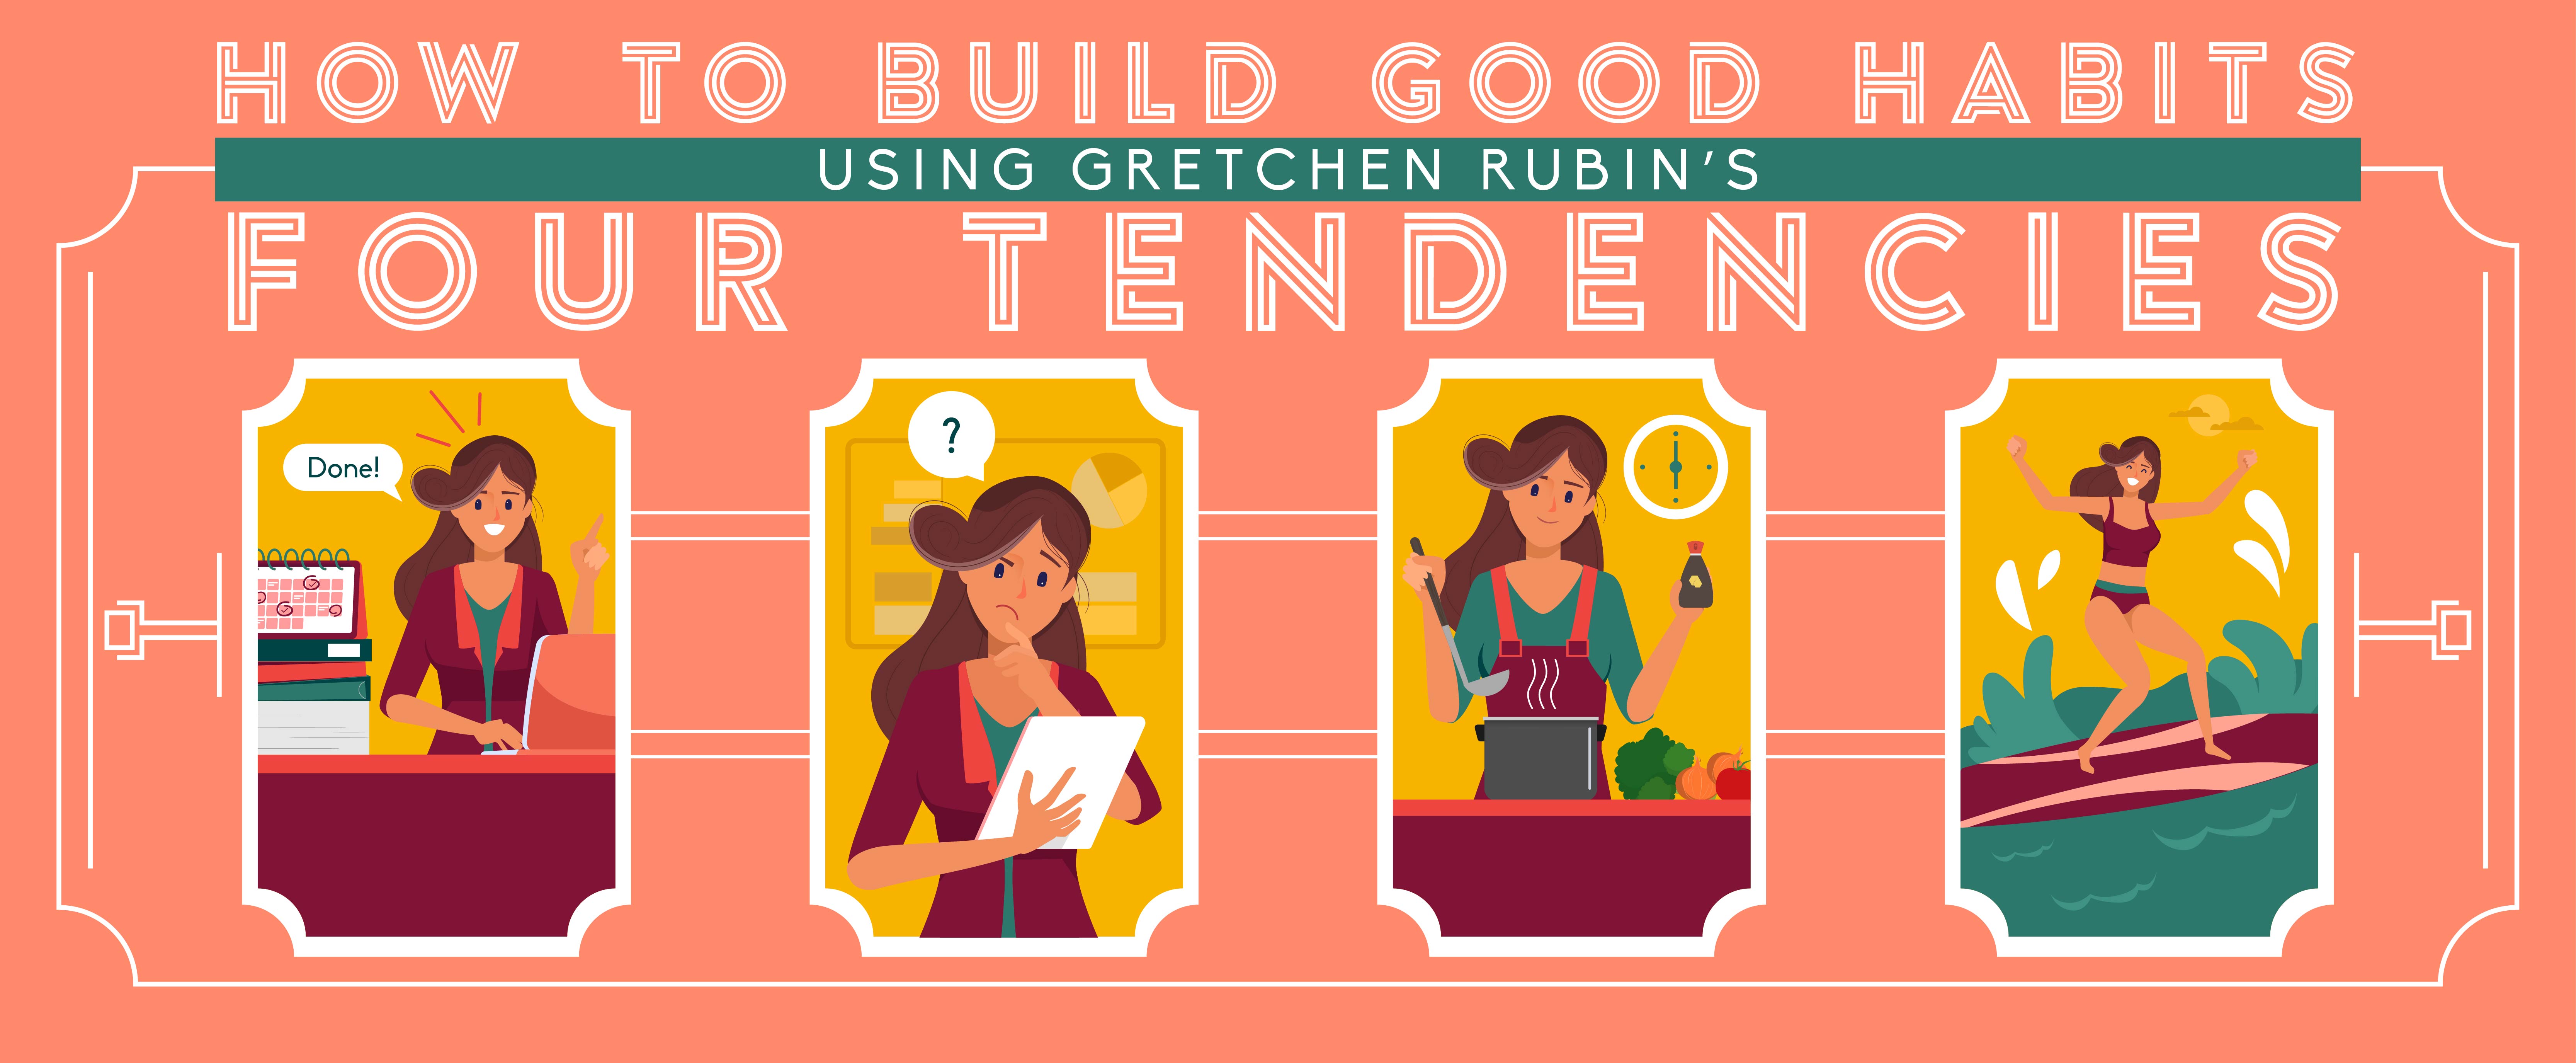 Infographic How To Build Good Habits Using The Four Tendencies